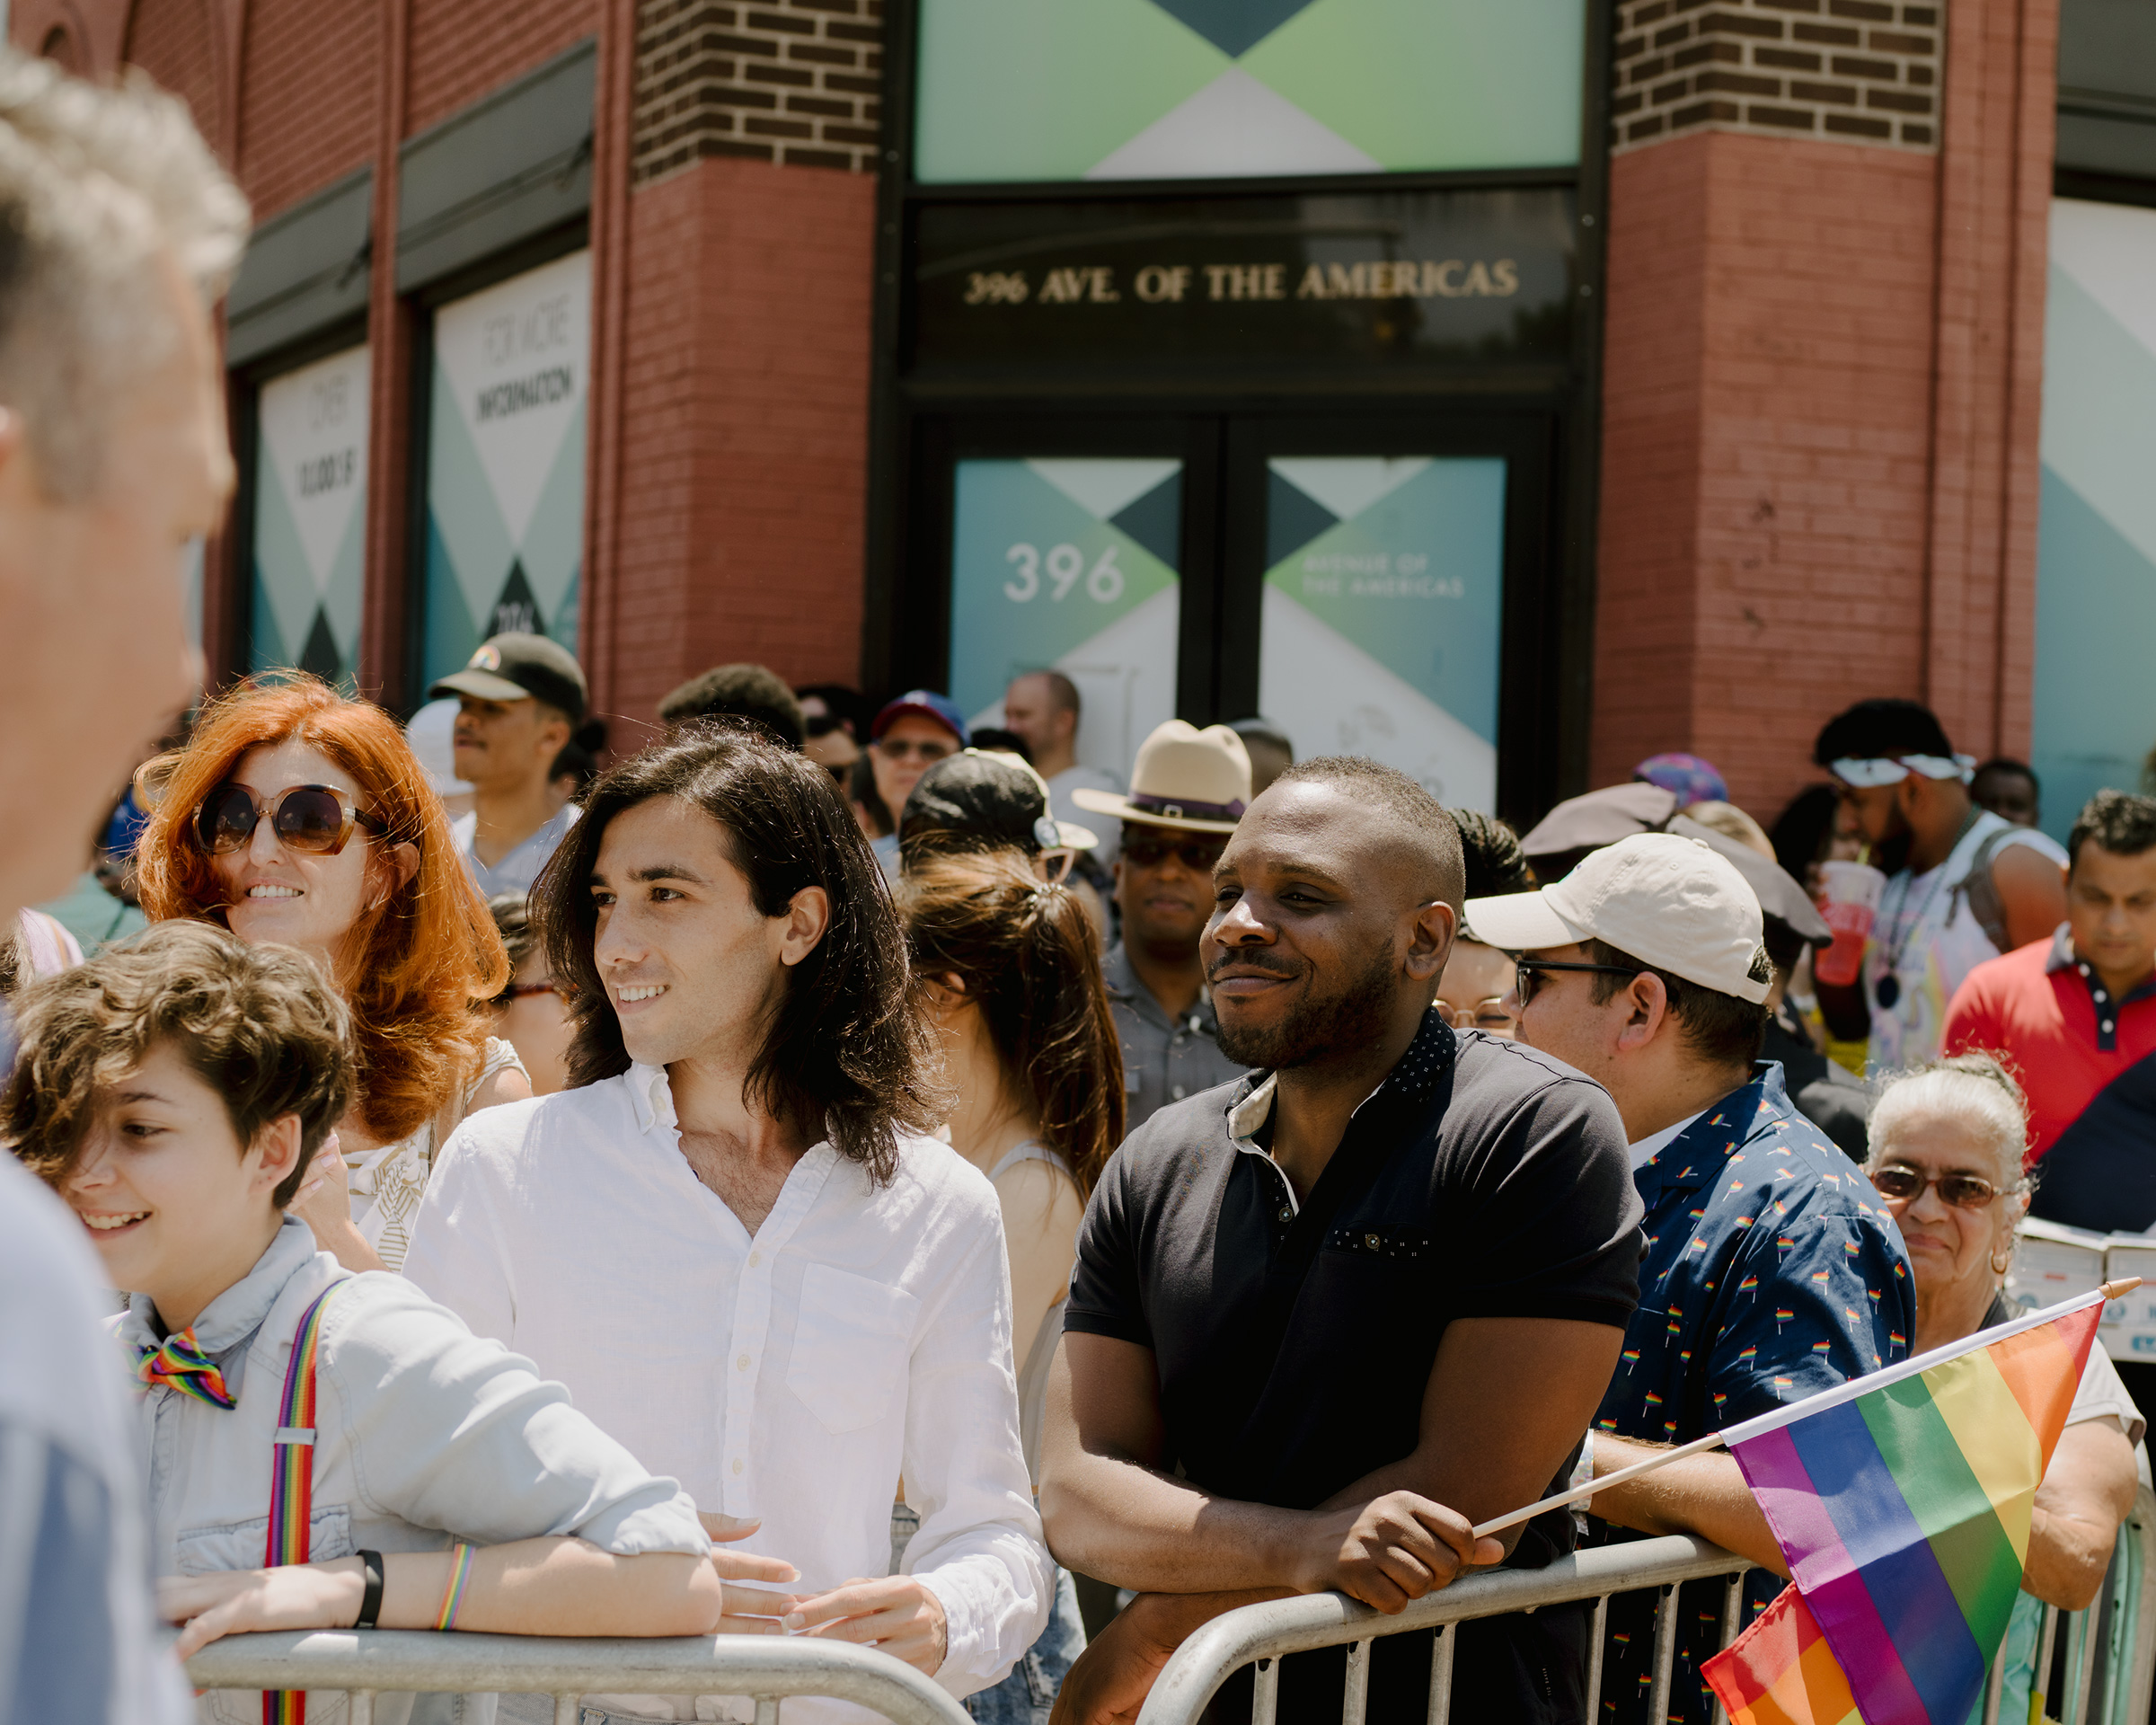 Amin Dzhabrailov and Kimahli Powell, executive director of the Rainbow Railroad organization, watch the Pride parade in New York on June 30, 2019. (Heather Sten for TIME)